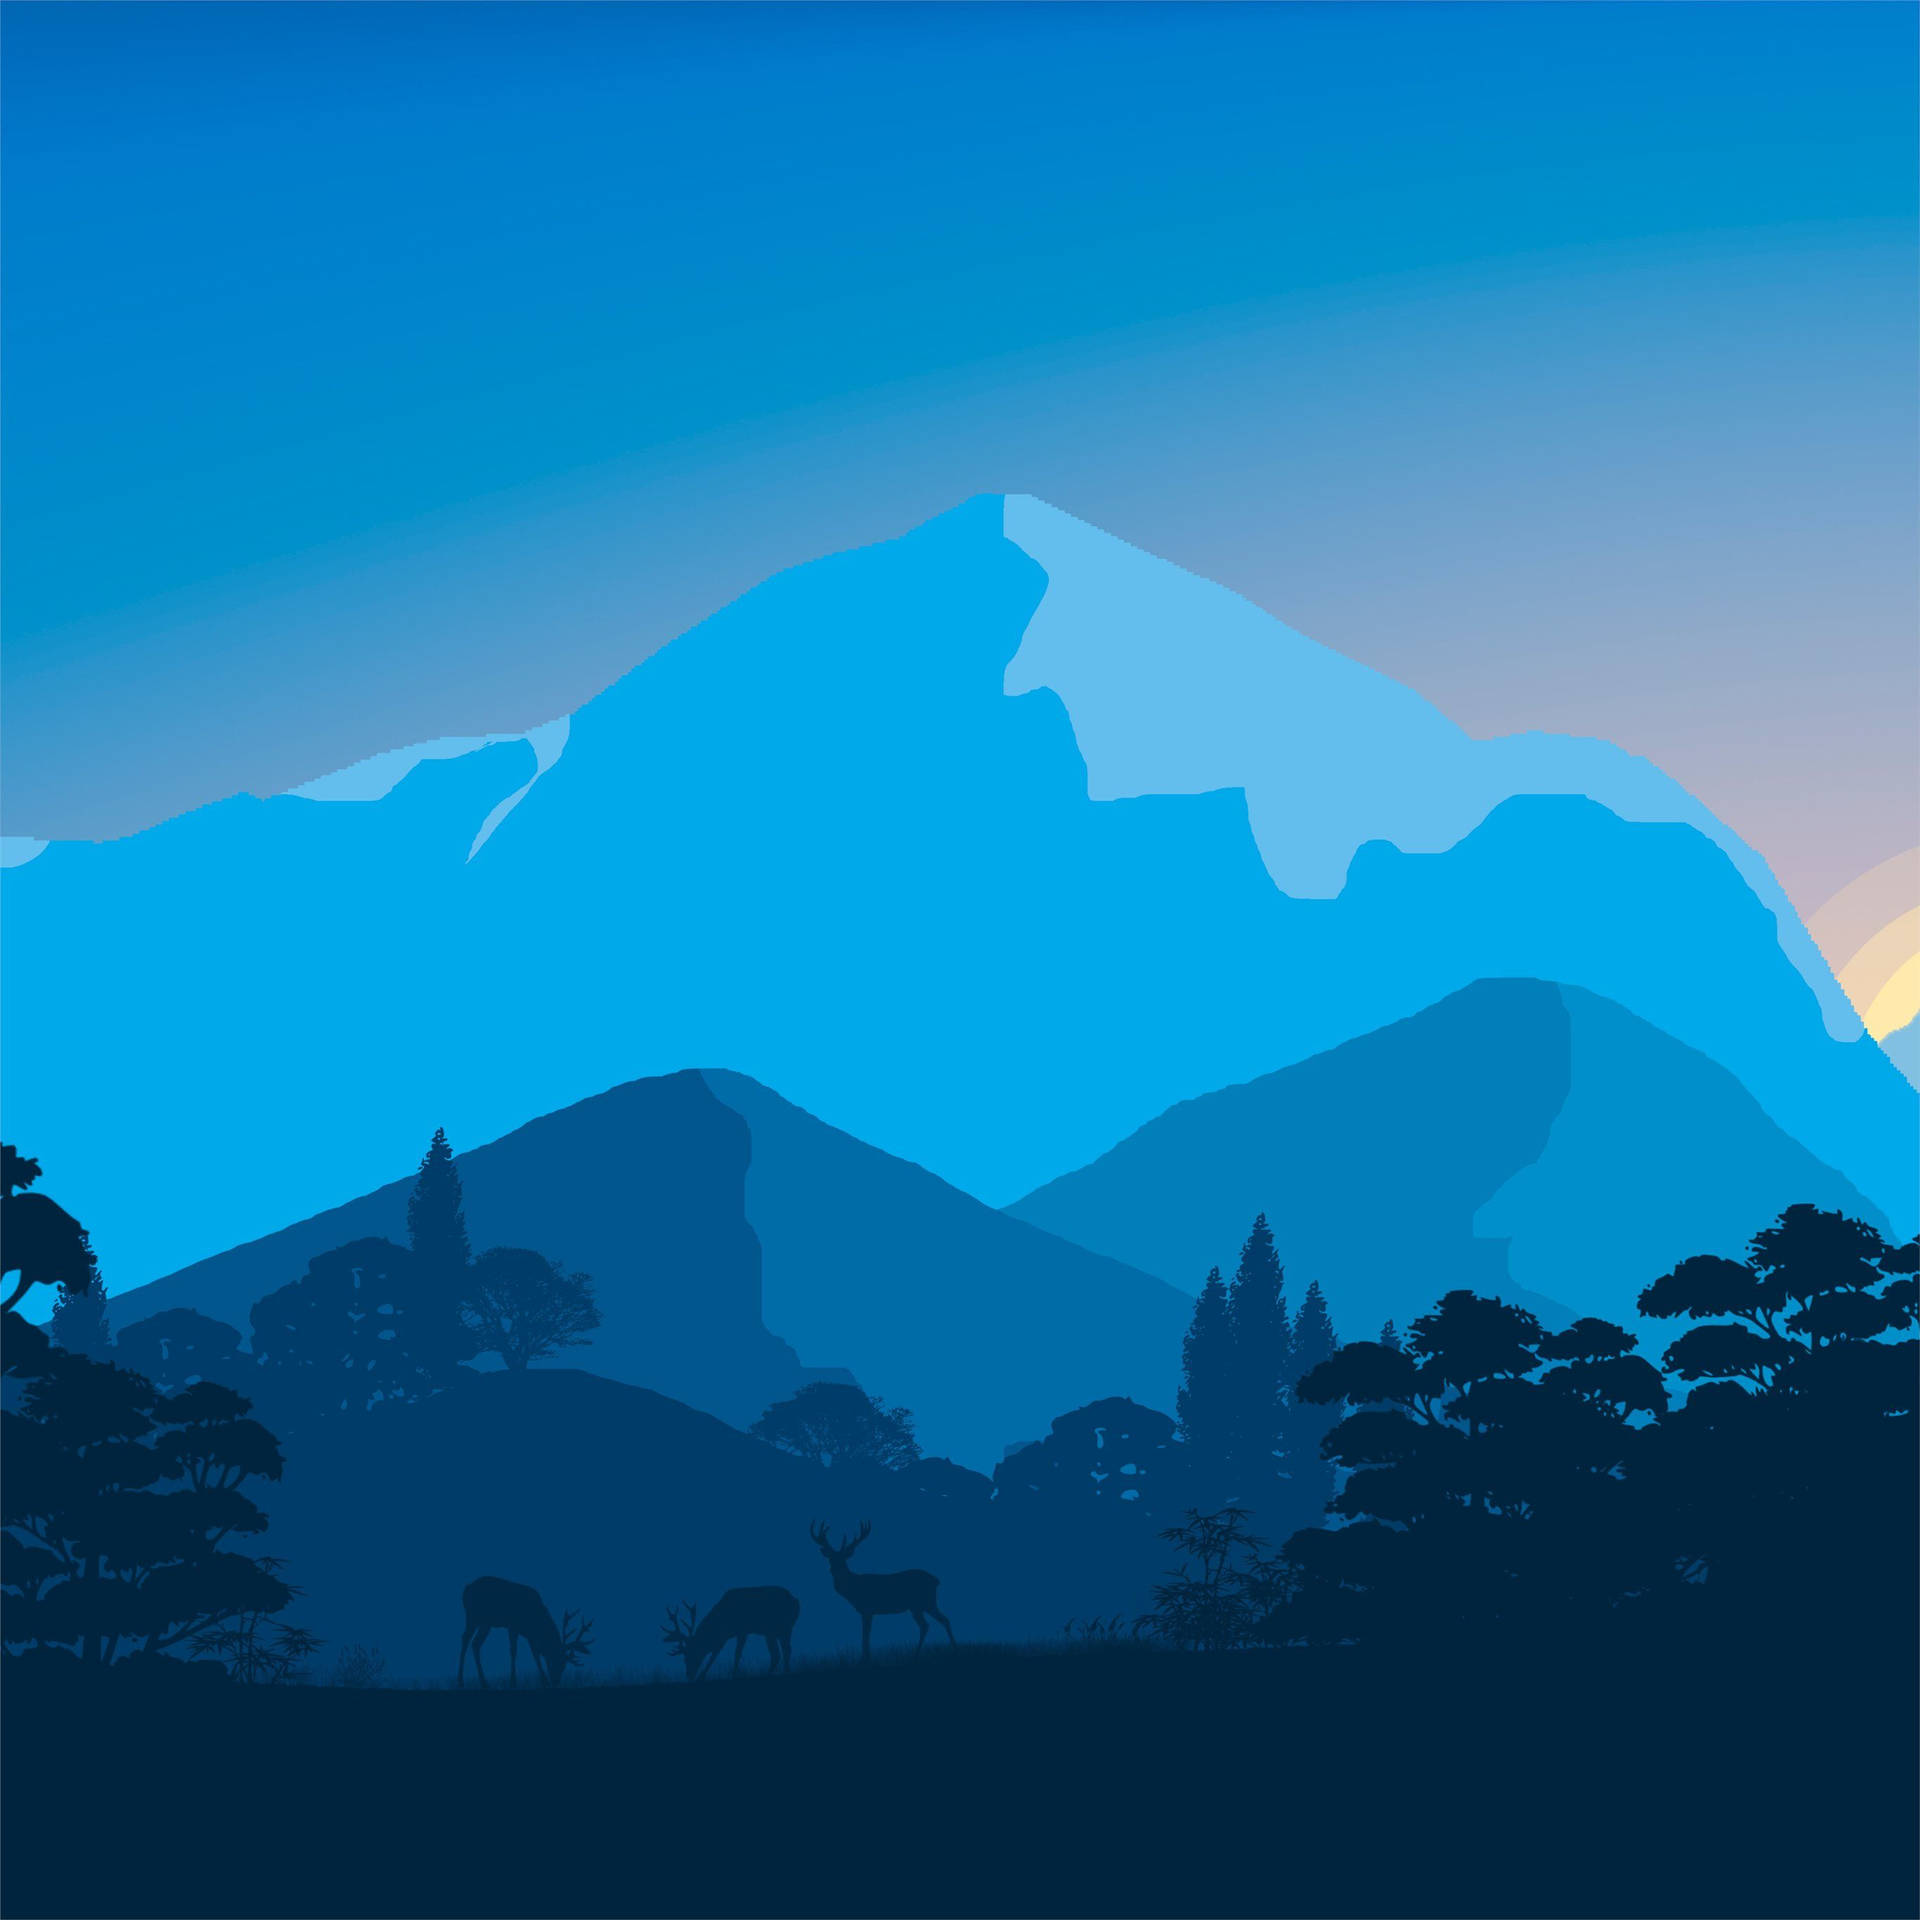 Best Ipad With Blue Mountains Wallpaper